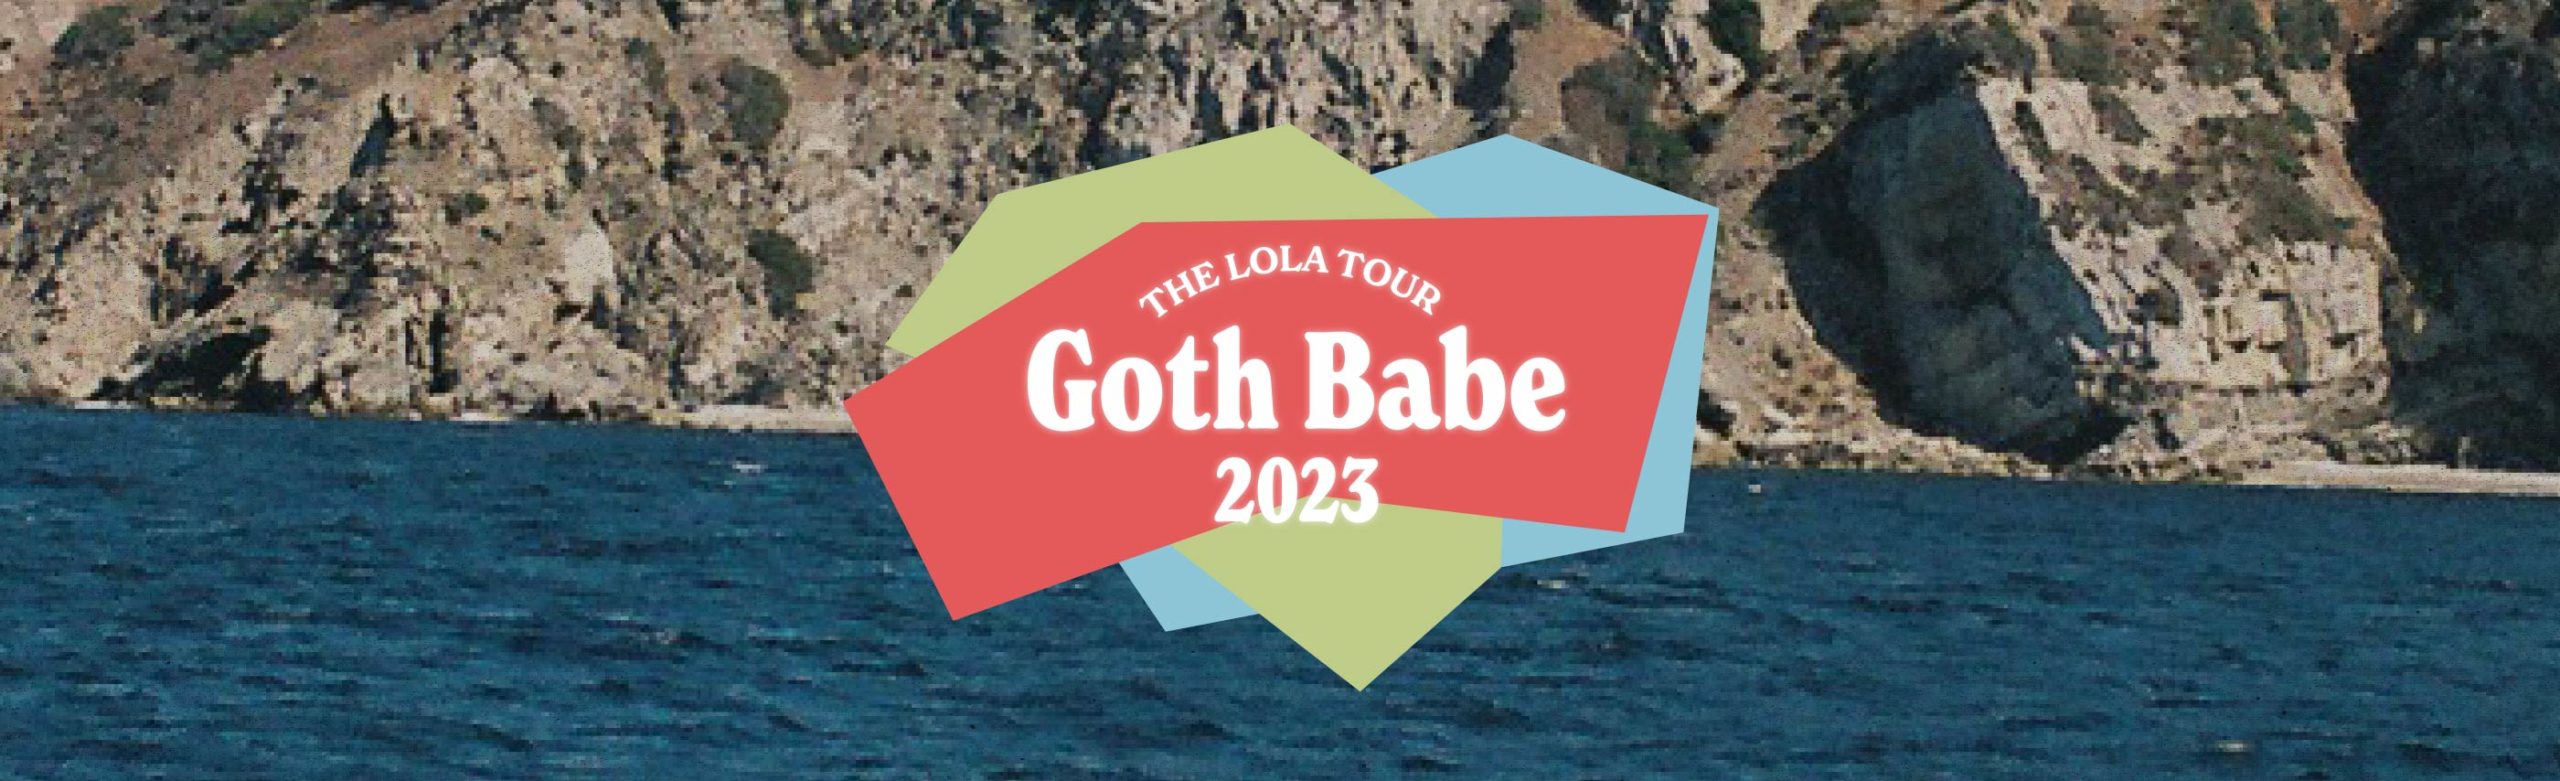 Goth Babe Announces The Lola Tour Dates at The Wilma and The ELM Image